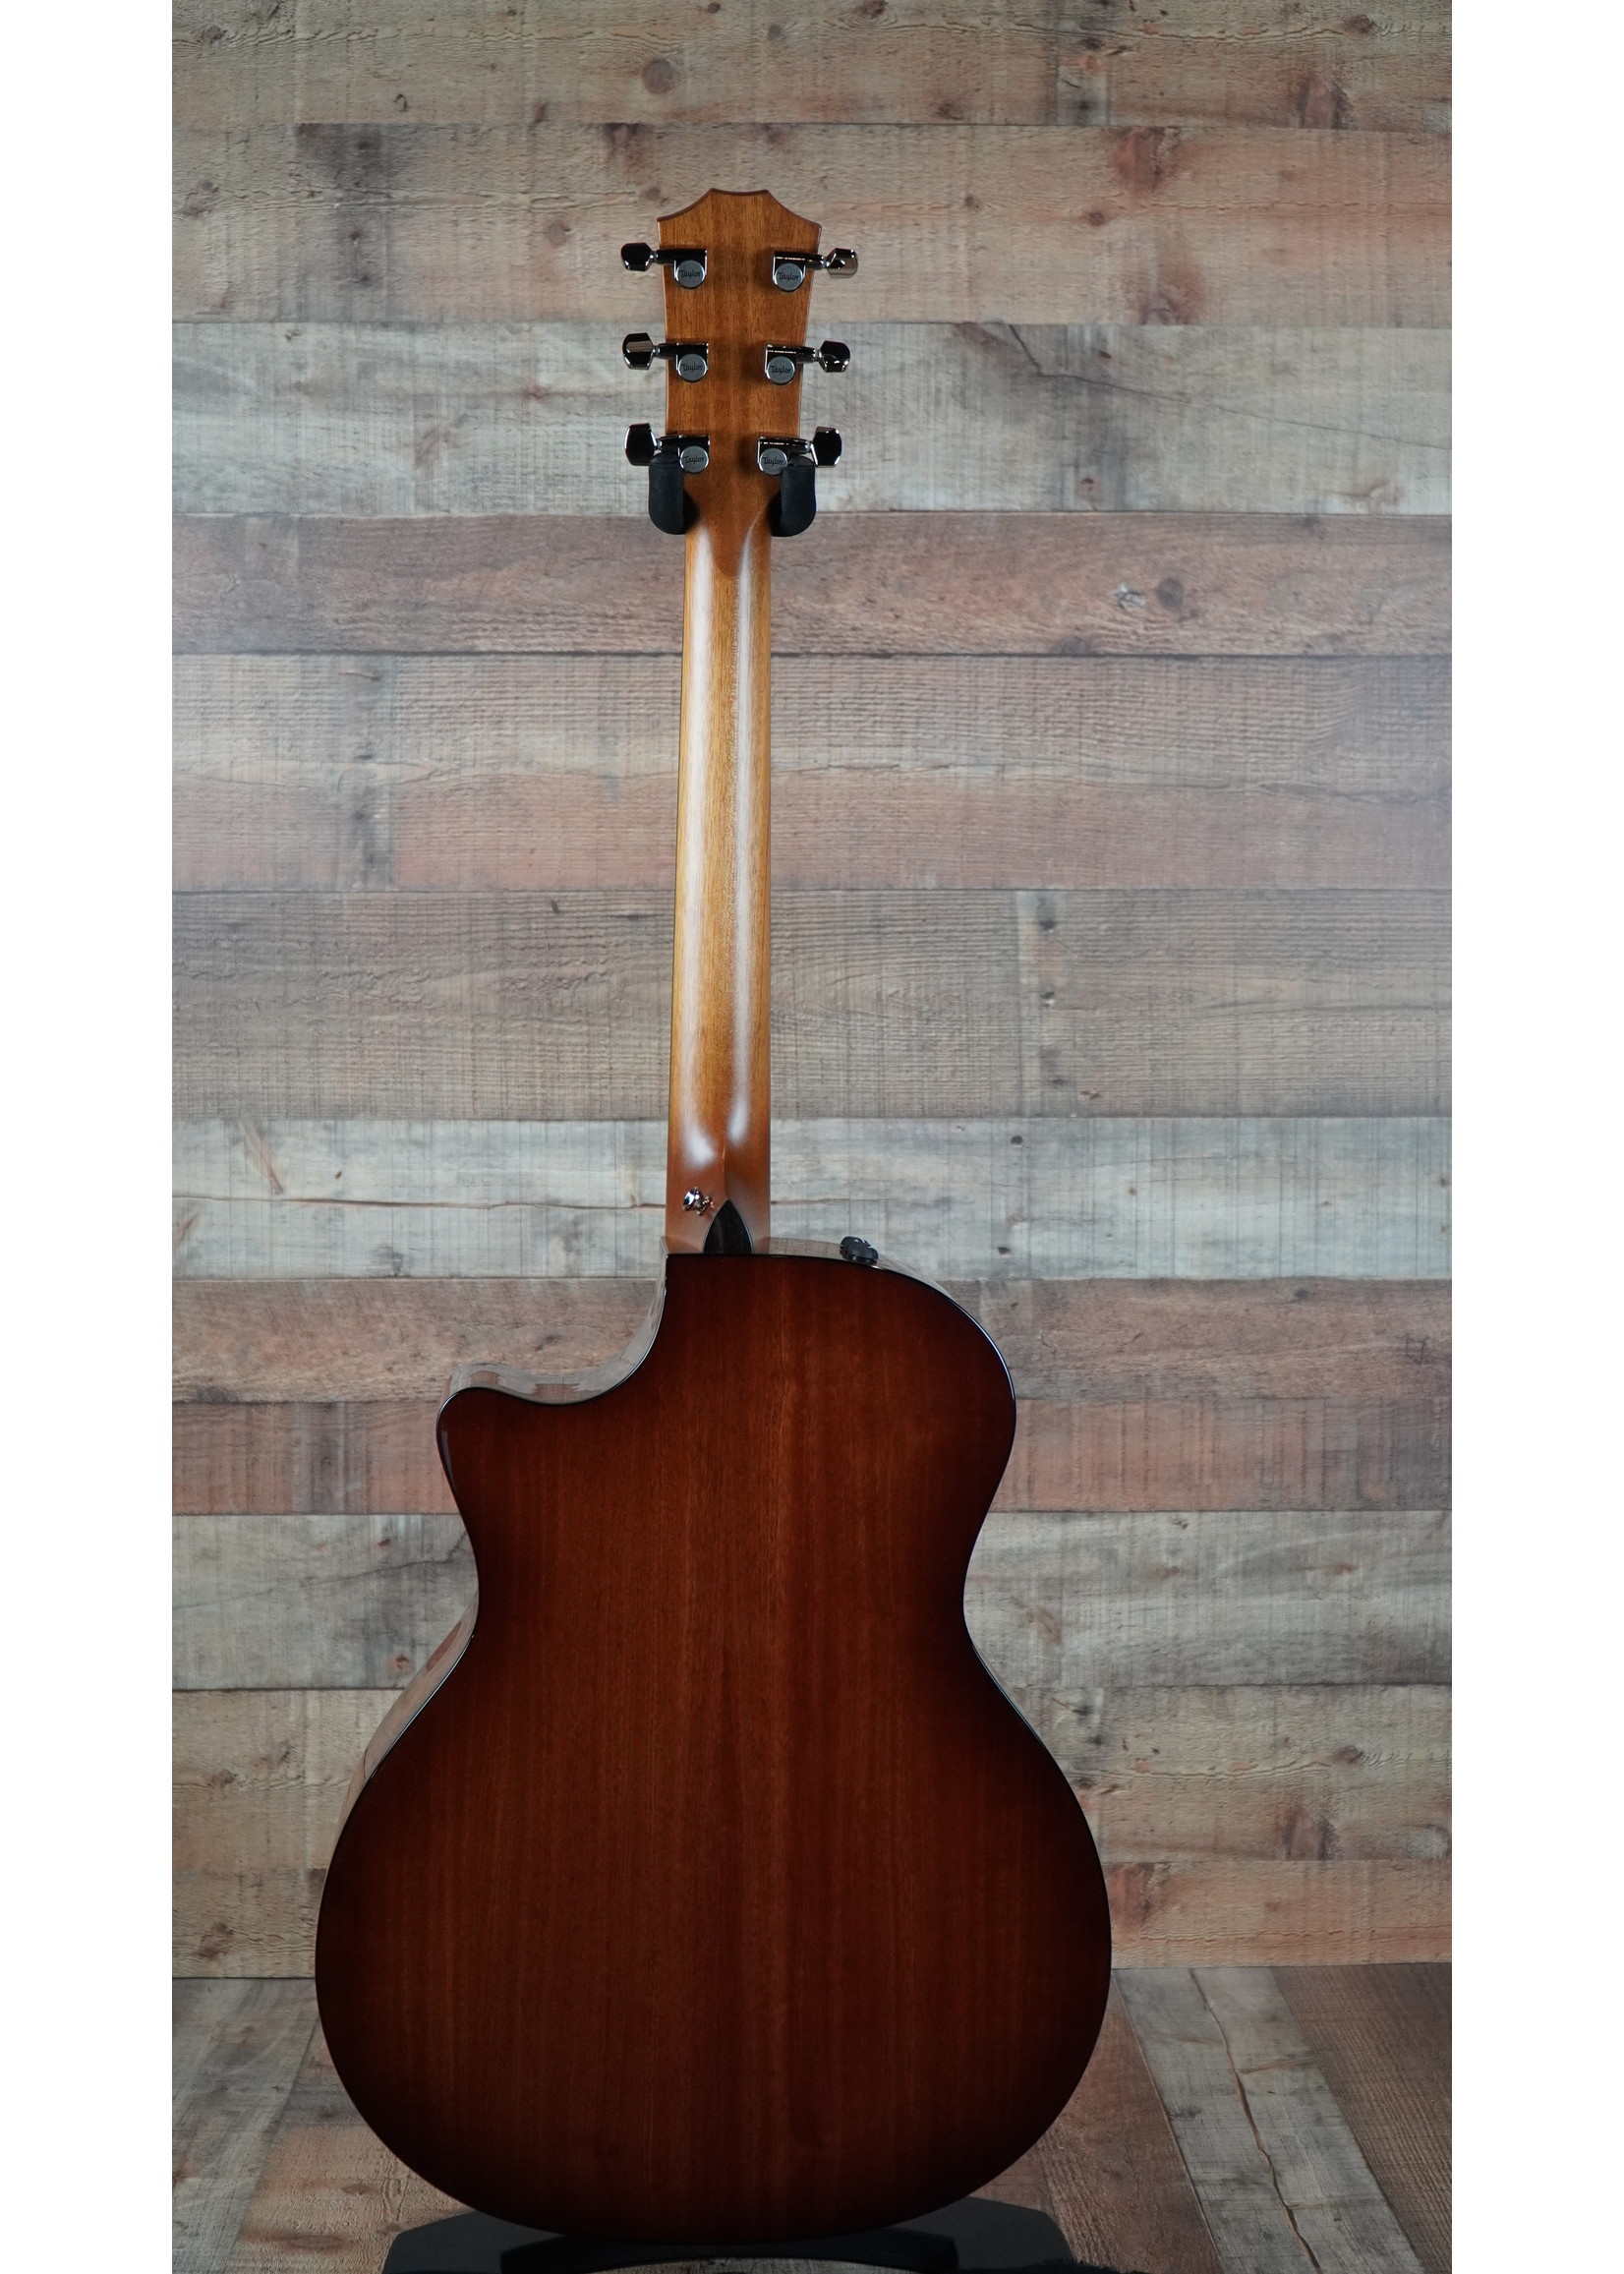 Taylor Taylor 6-String | Sitka Spruce Top | Urban Ironbark Back and Sides | Tropical Mahogany Neck | West African Crelicam Ebony Fretboard | Expression System® 2 Electronics | Venetian Cutaway | Taylor Deluxe Hardshell Brown Case